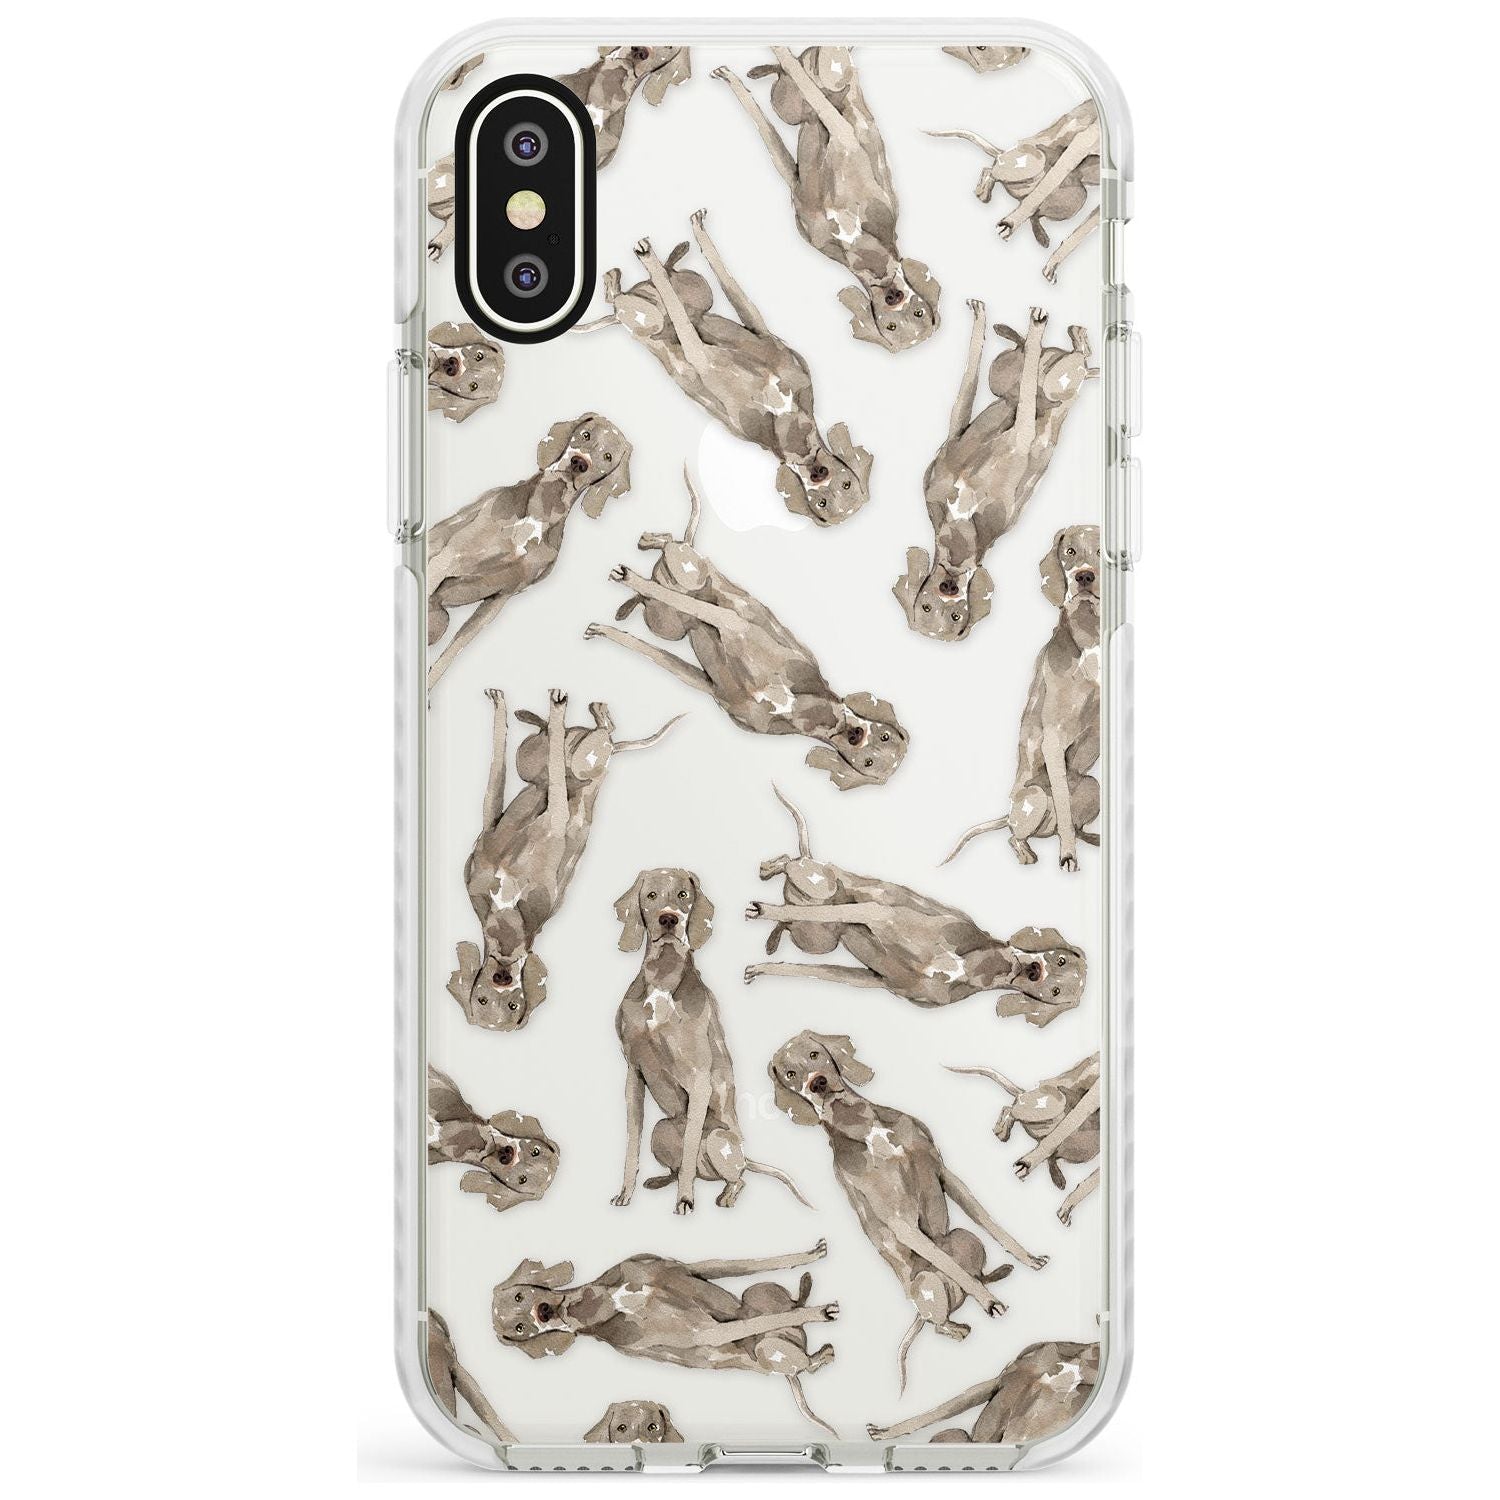 Weimaraner Watercolour Dog Pattern Impact Phone Case for iPhone X XS Max XR